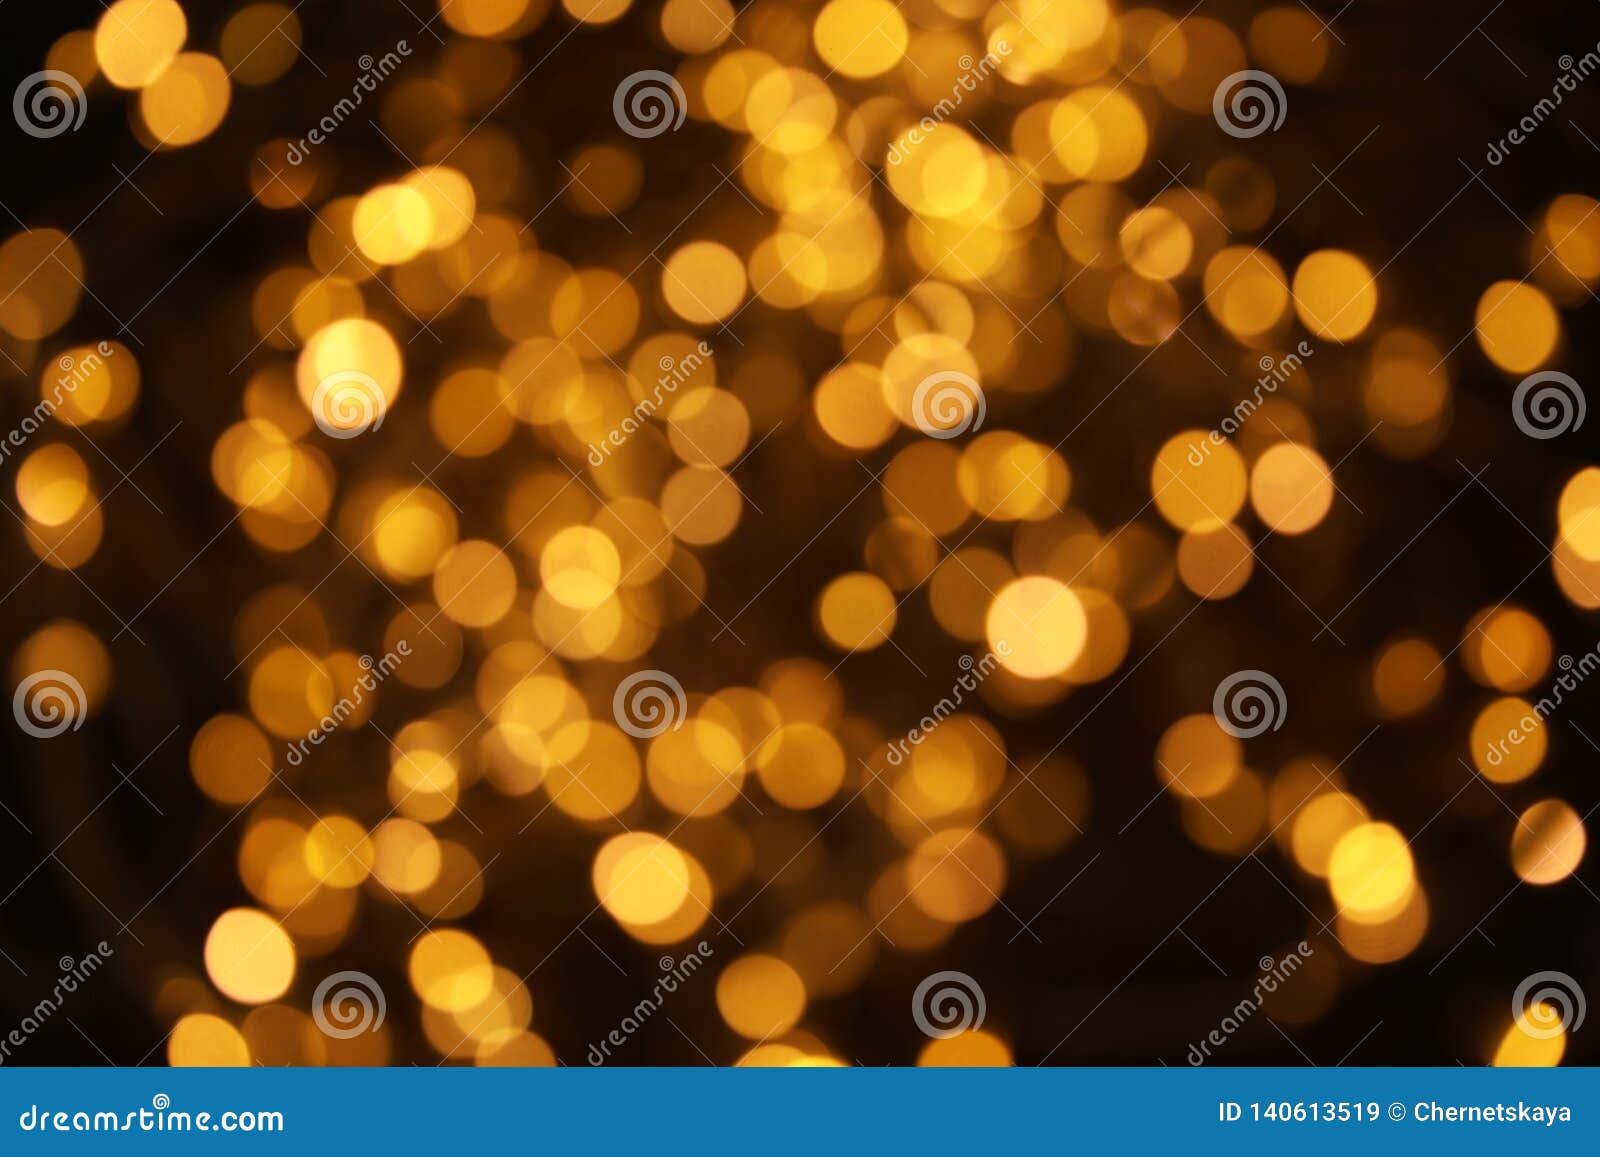 Gold Glitter with Bokeh Effect Stock Image - Image of decoration, glamour:  140613519